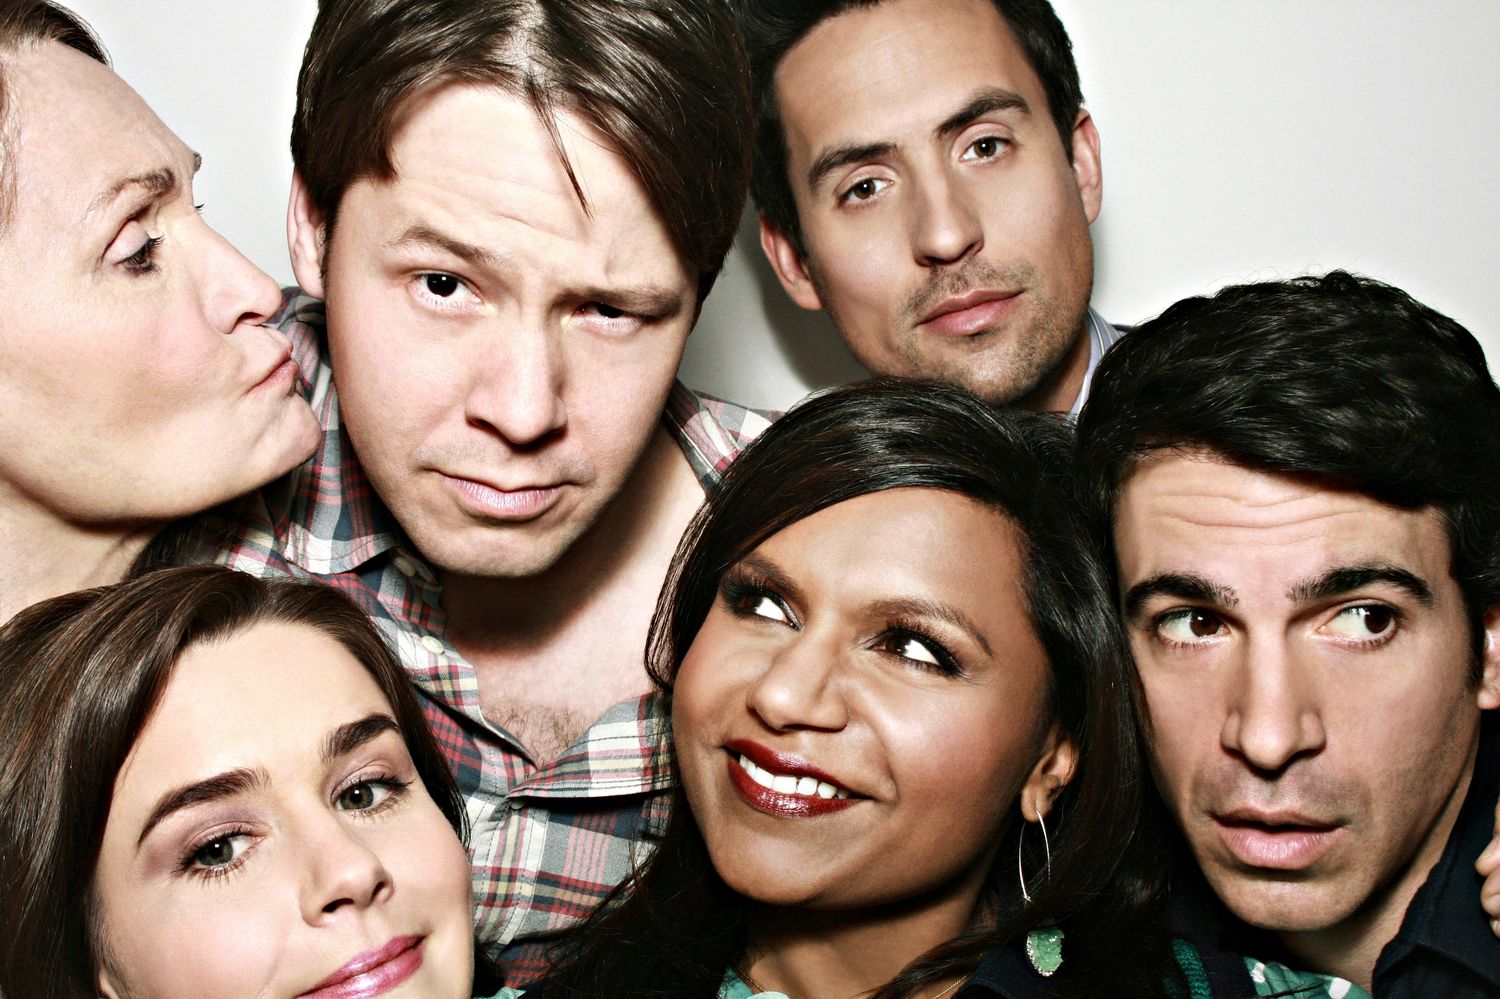 The Mindy Project #3